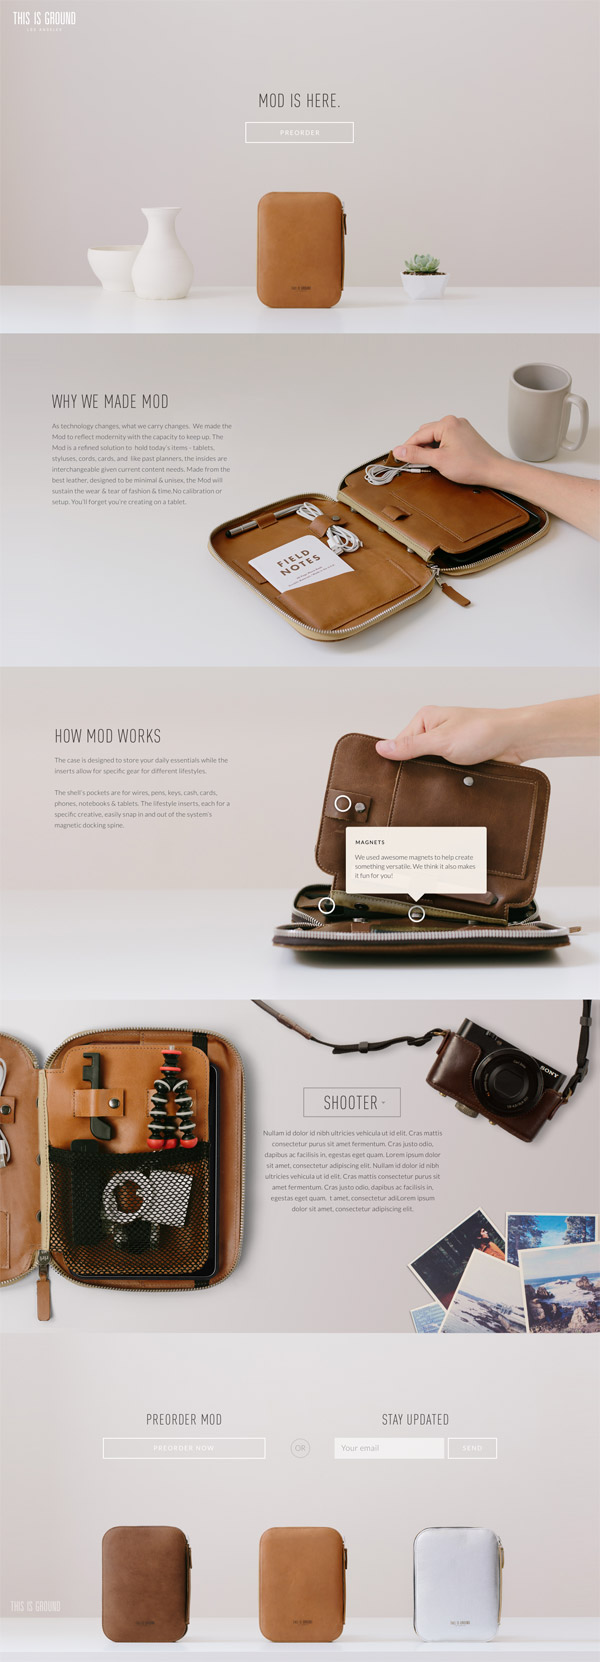 15-websites-with-full-page-designs-8